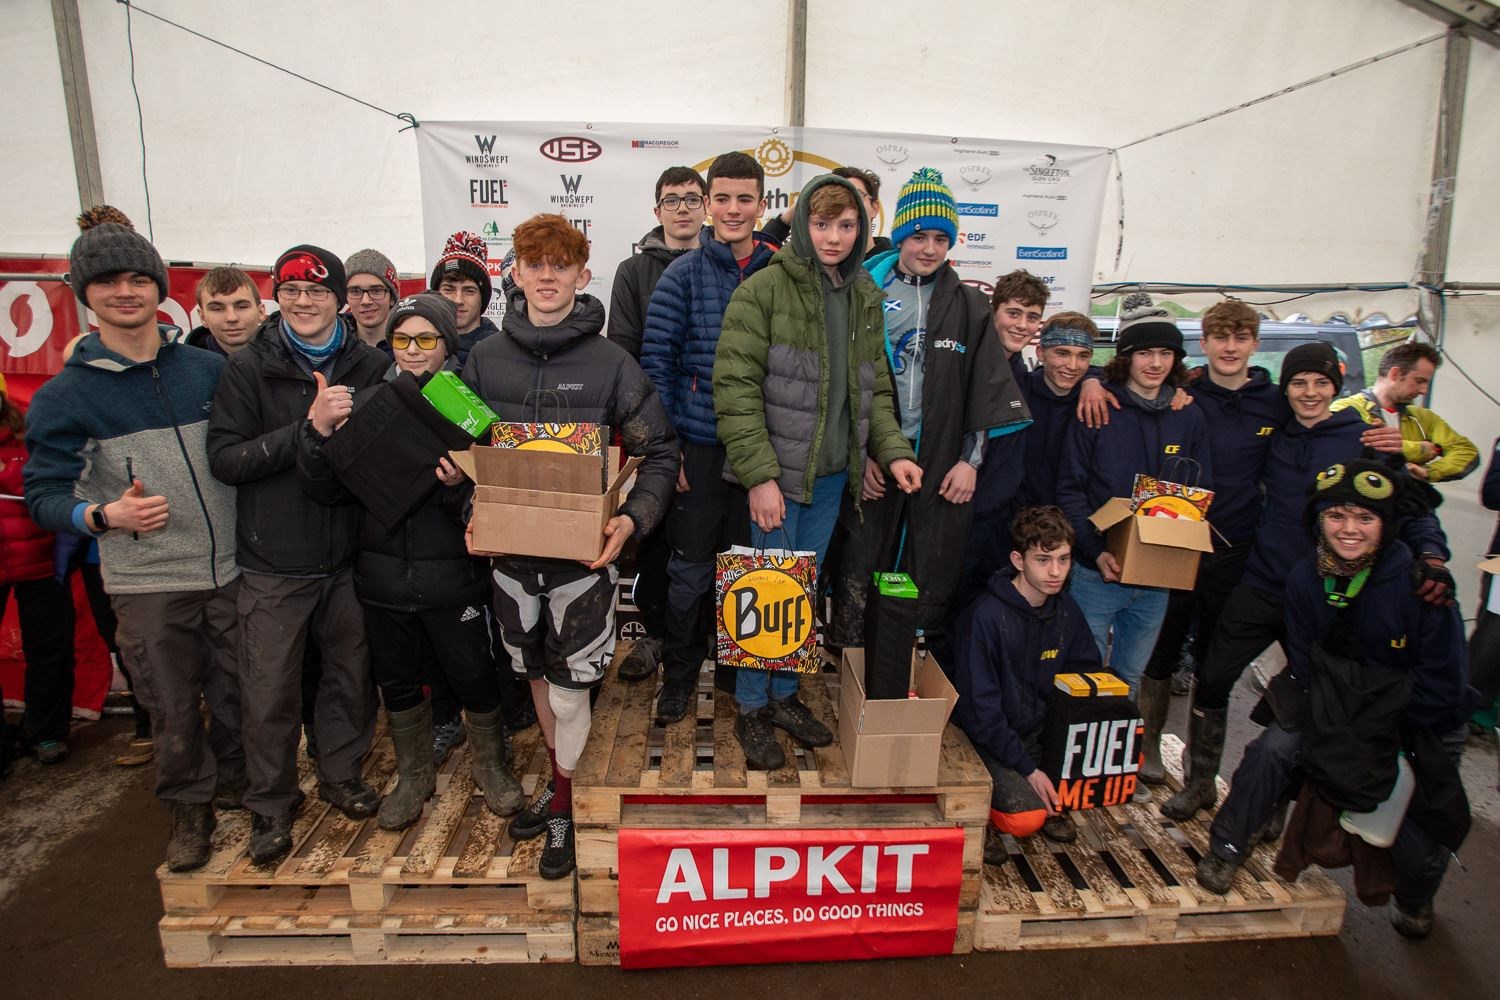 Invergordon Academy won the eights title at Strathpuffer. Picture: Gary Williamson Photography